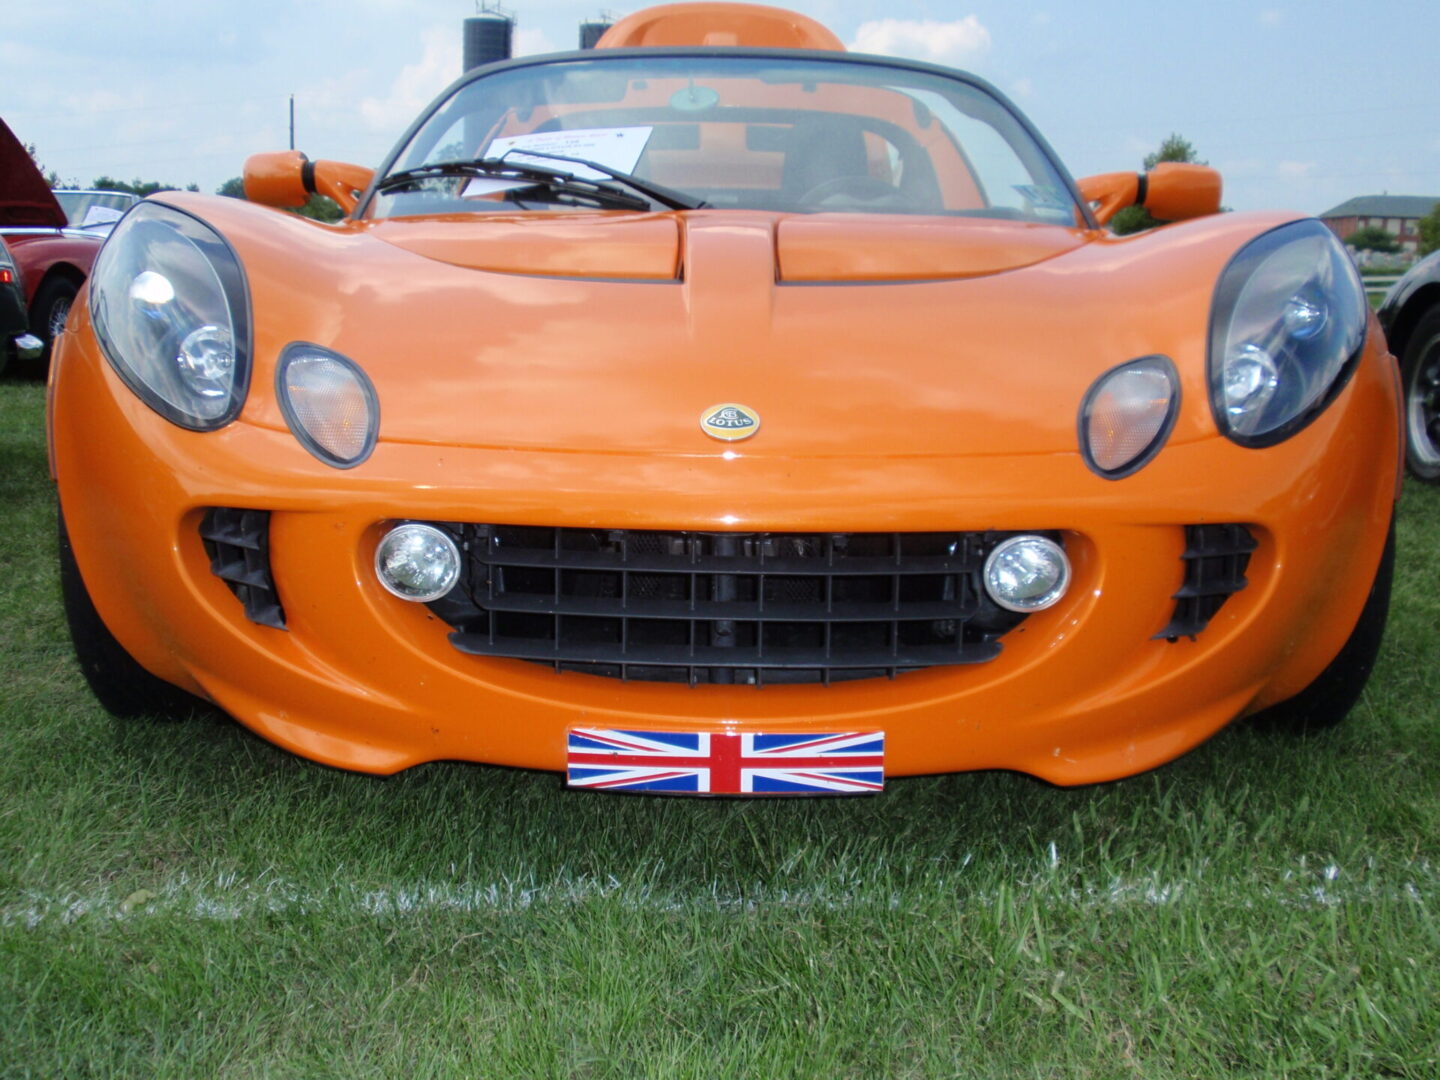 A close up of an orange sports car with the british flag on it.